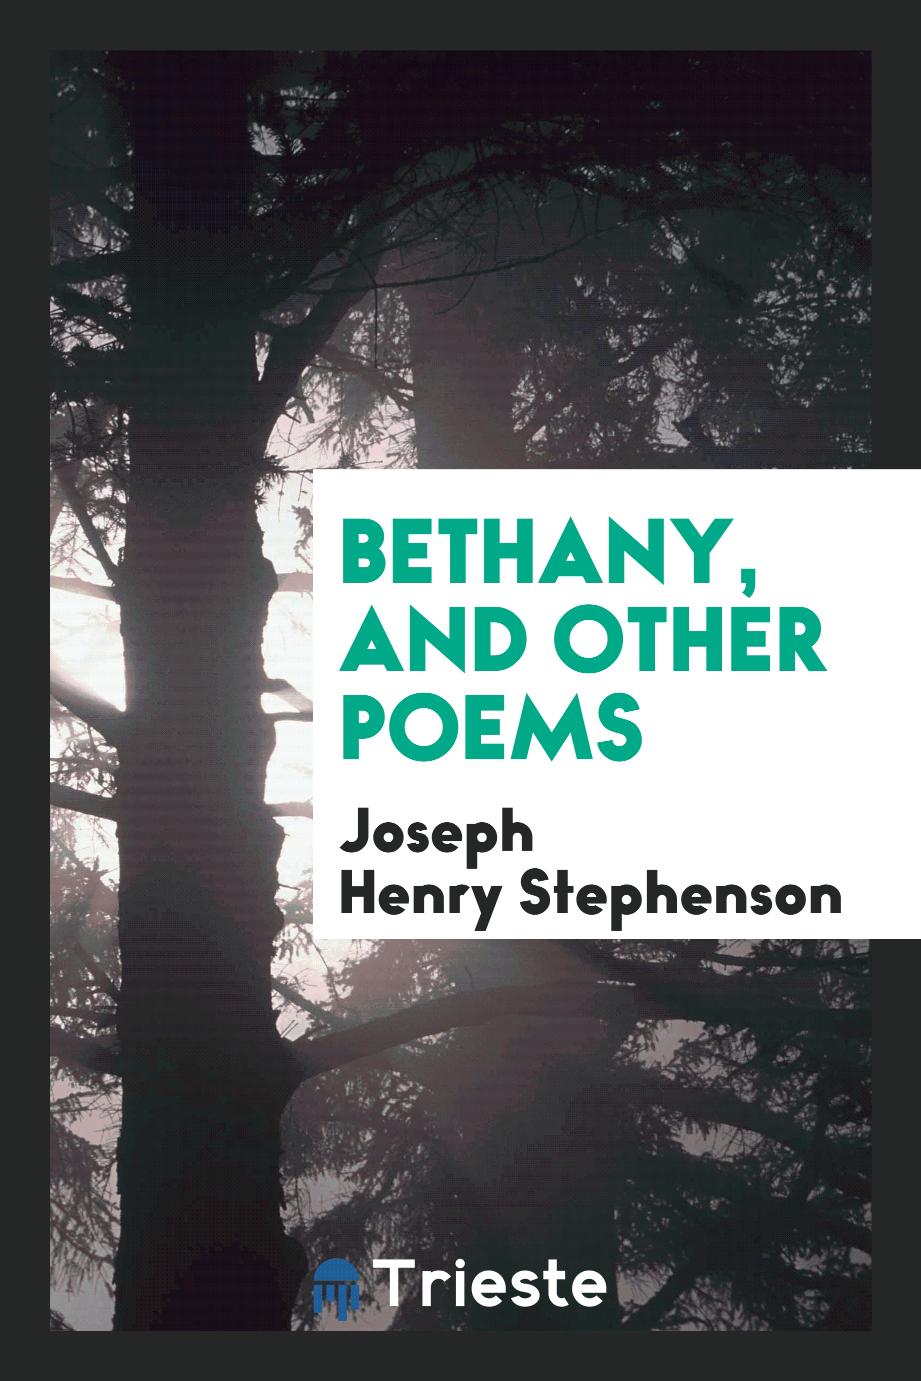 Bethany, and Other Poems